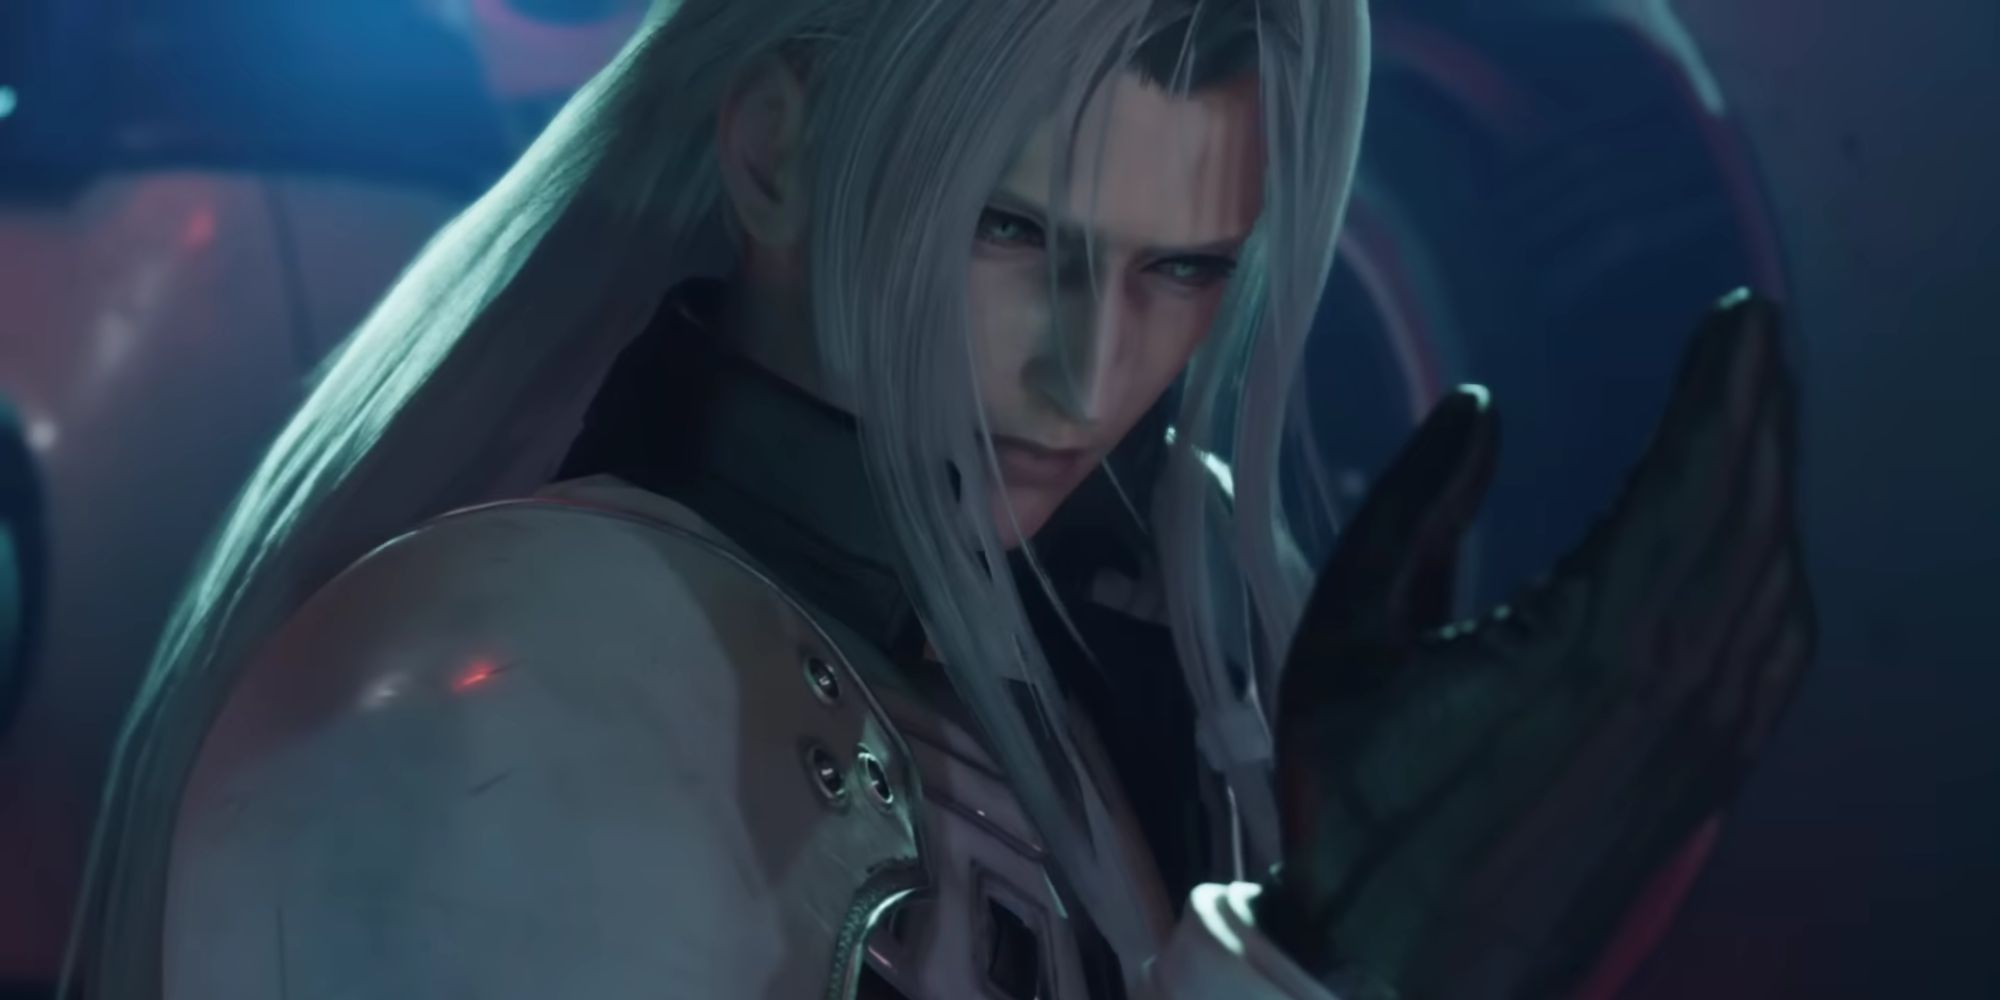 Pin by Theresa on Sephiroth♥️♥️ | Final fantasy sephiroth, Anime character  design, Final fantasy